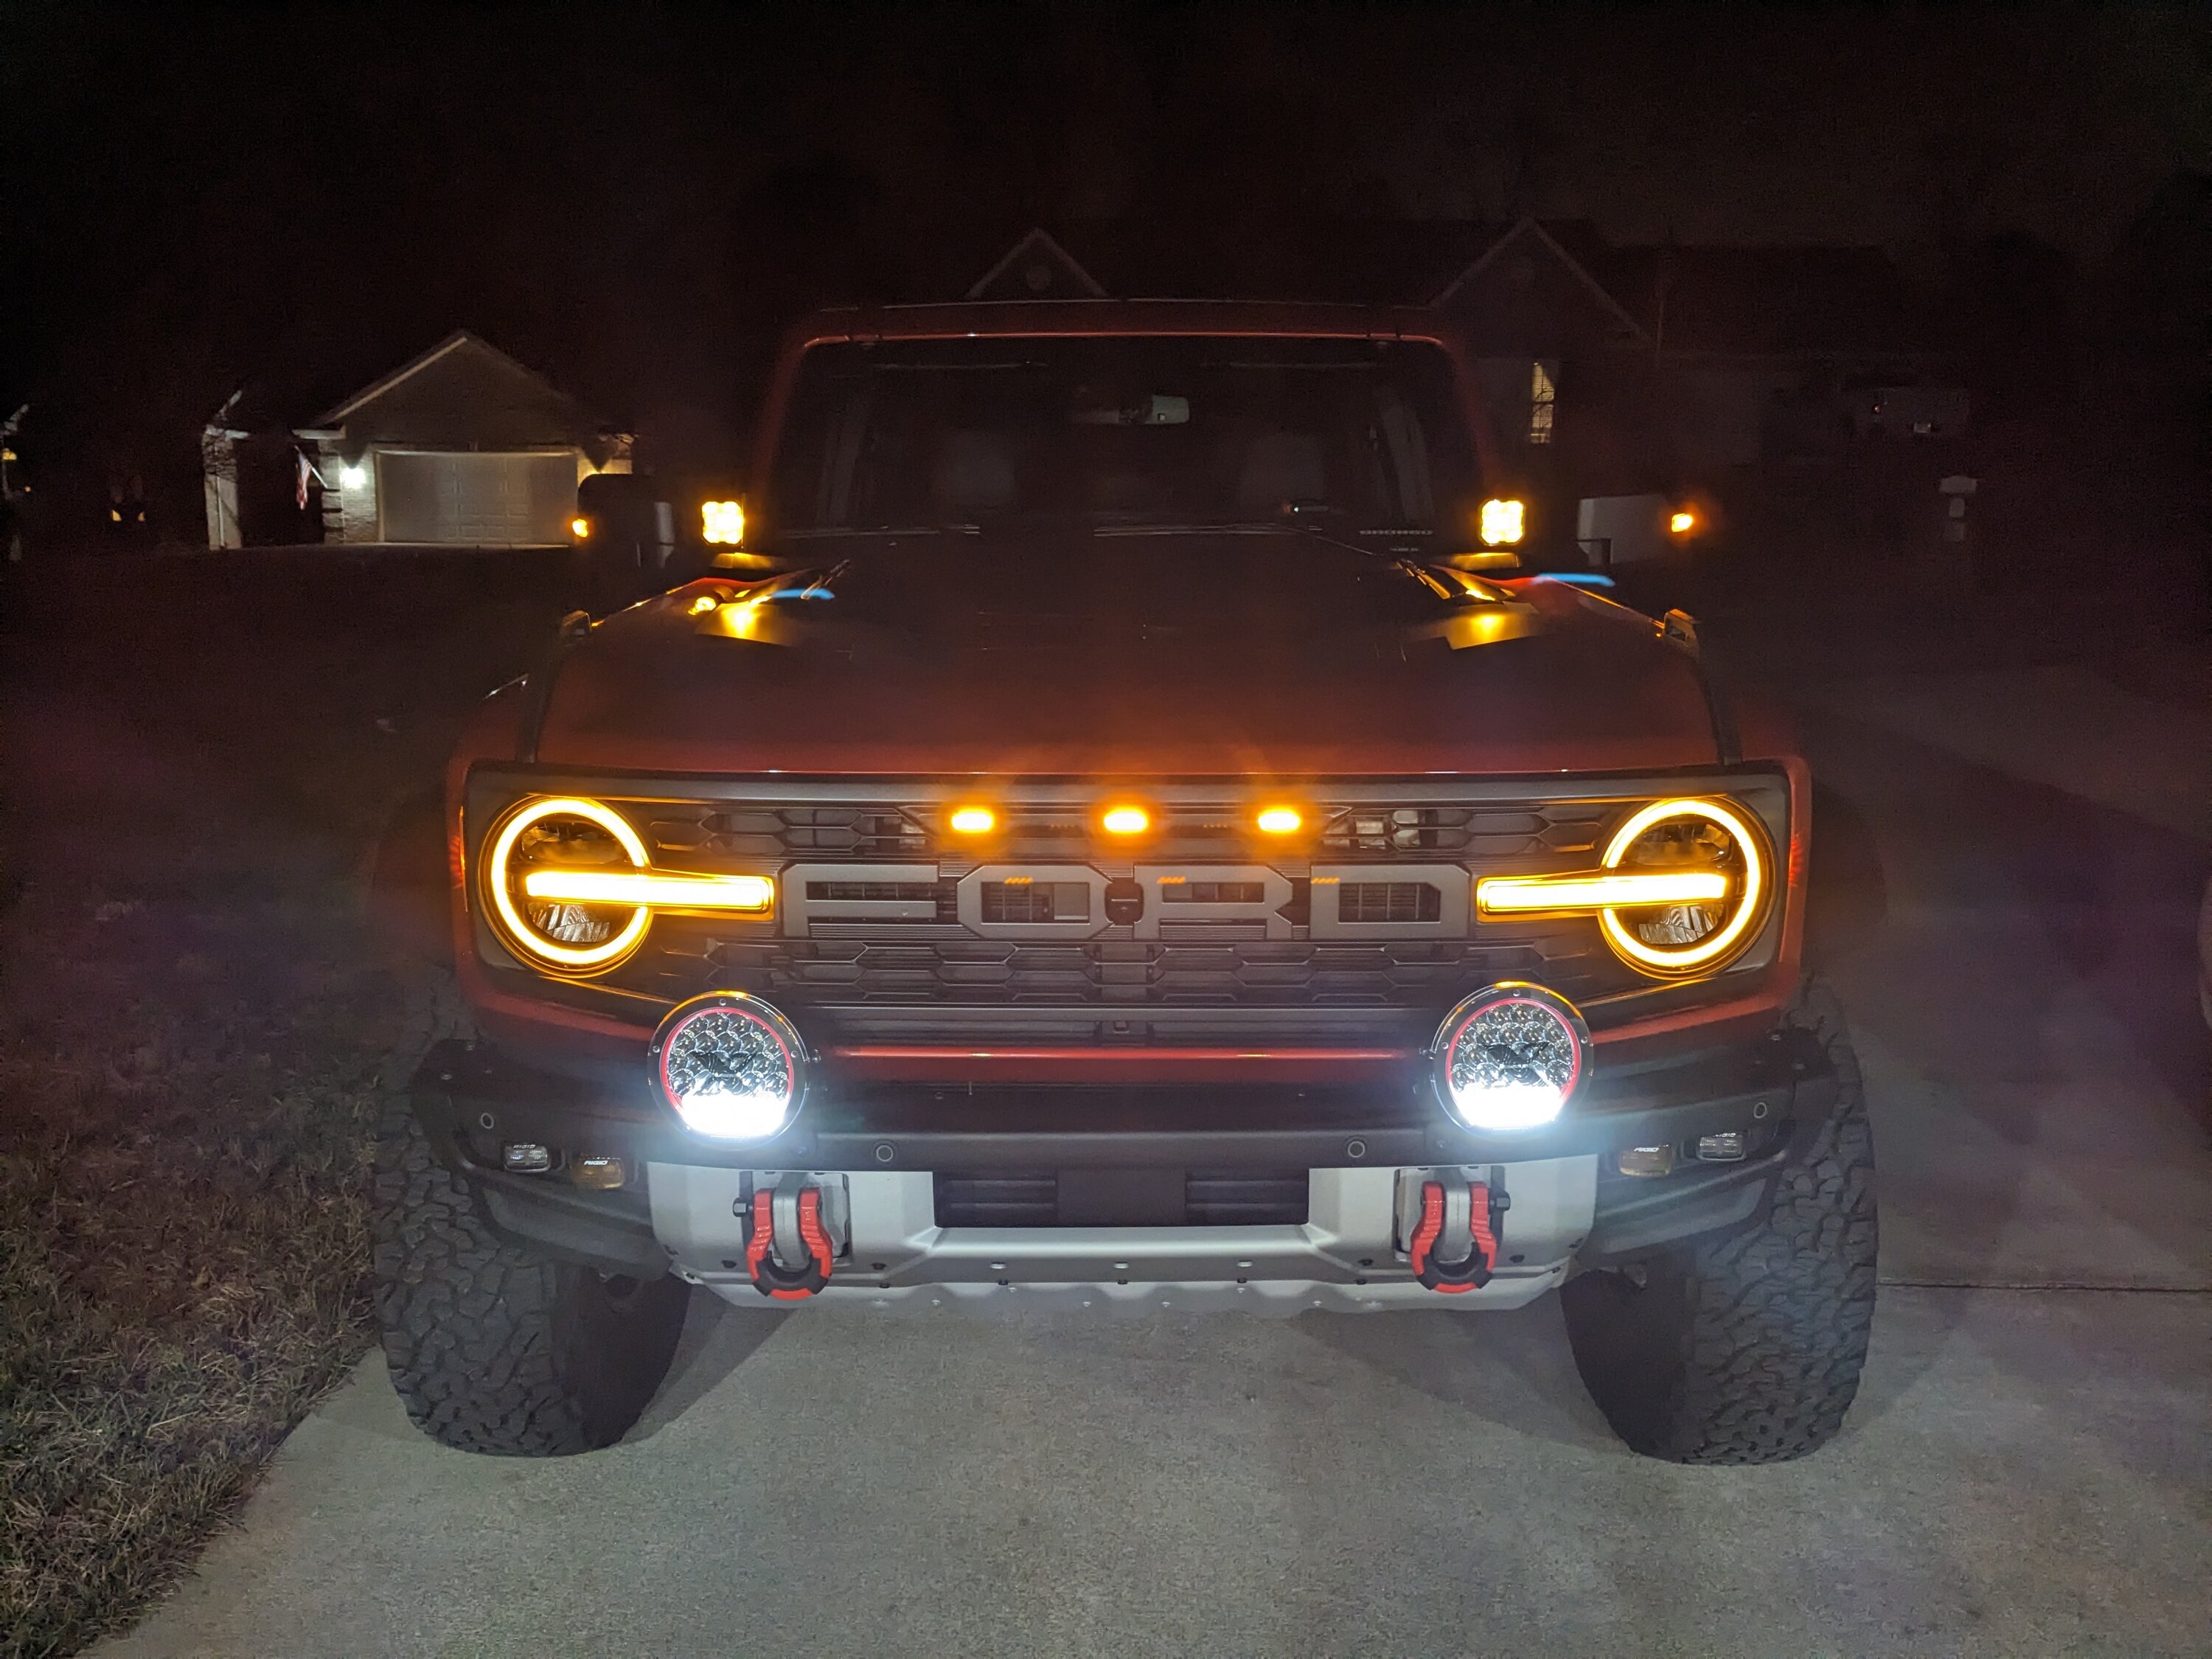 Ford Bronco RTR ProjectX HP.70 Bronco Lights Installed PXL_20230211_000438859